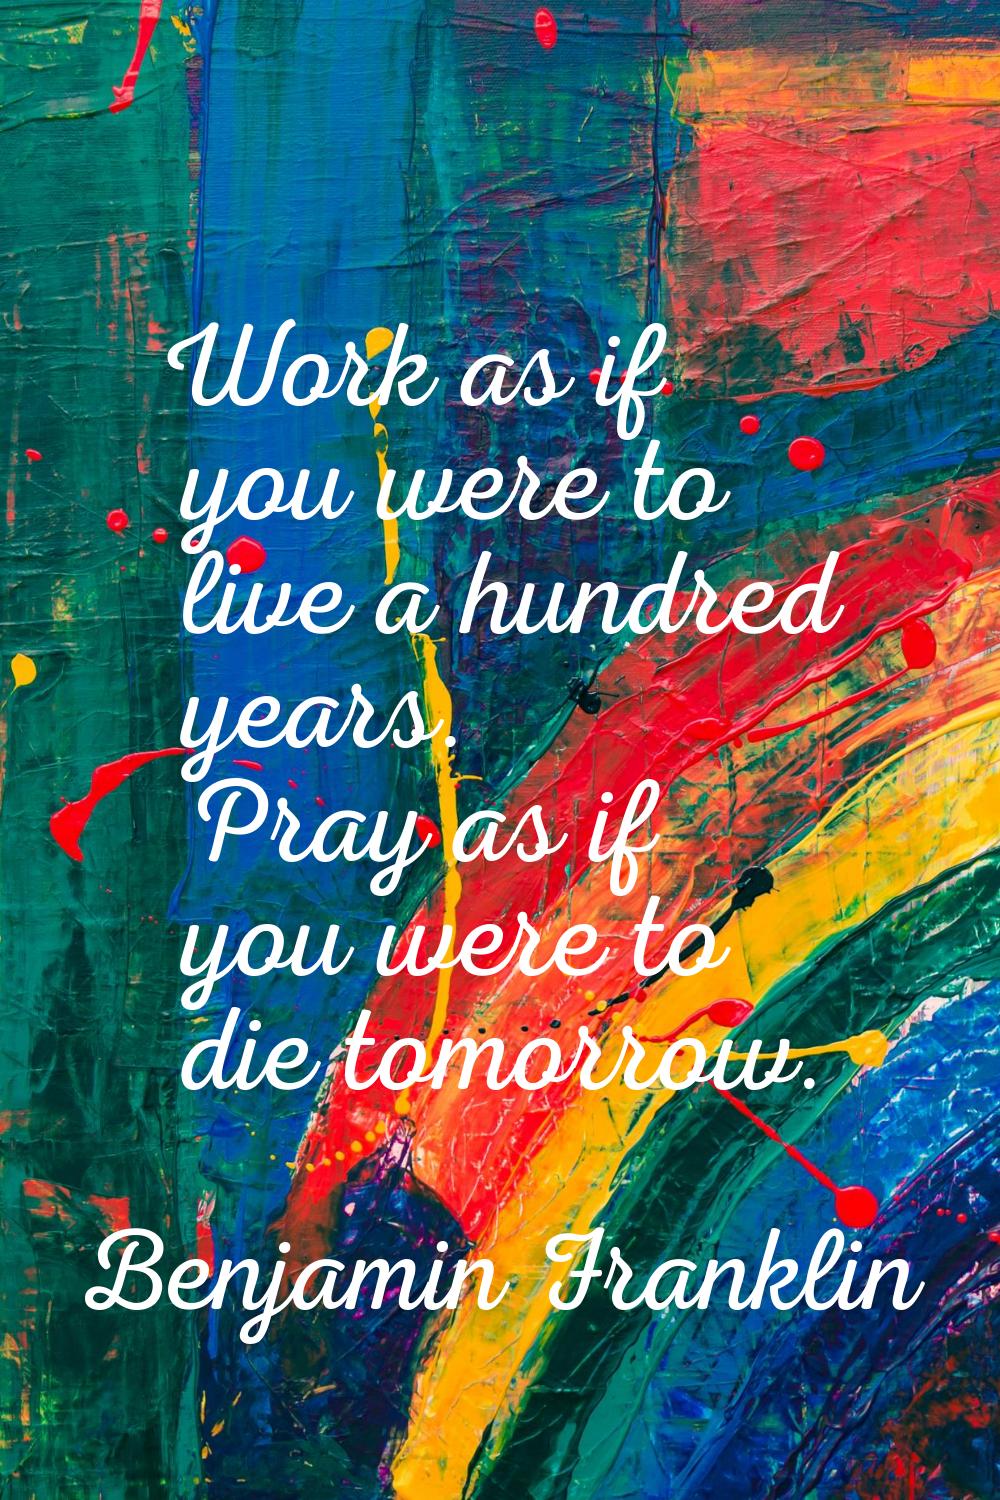 Work as if you were to live a hundred years. Pray as if you were to die tomorrow.